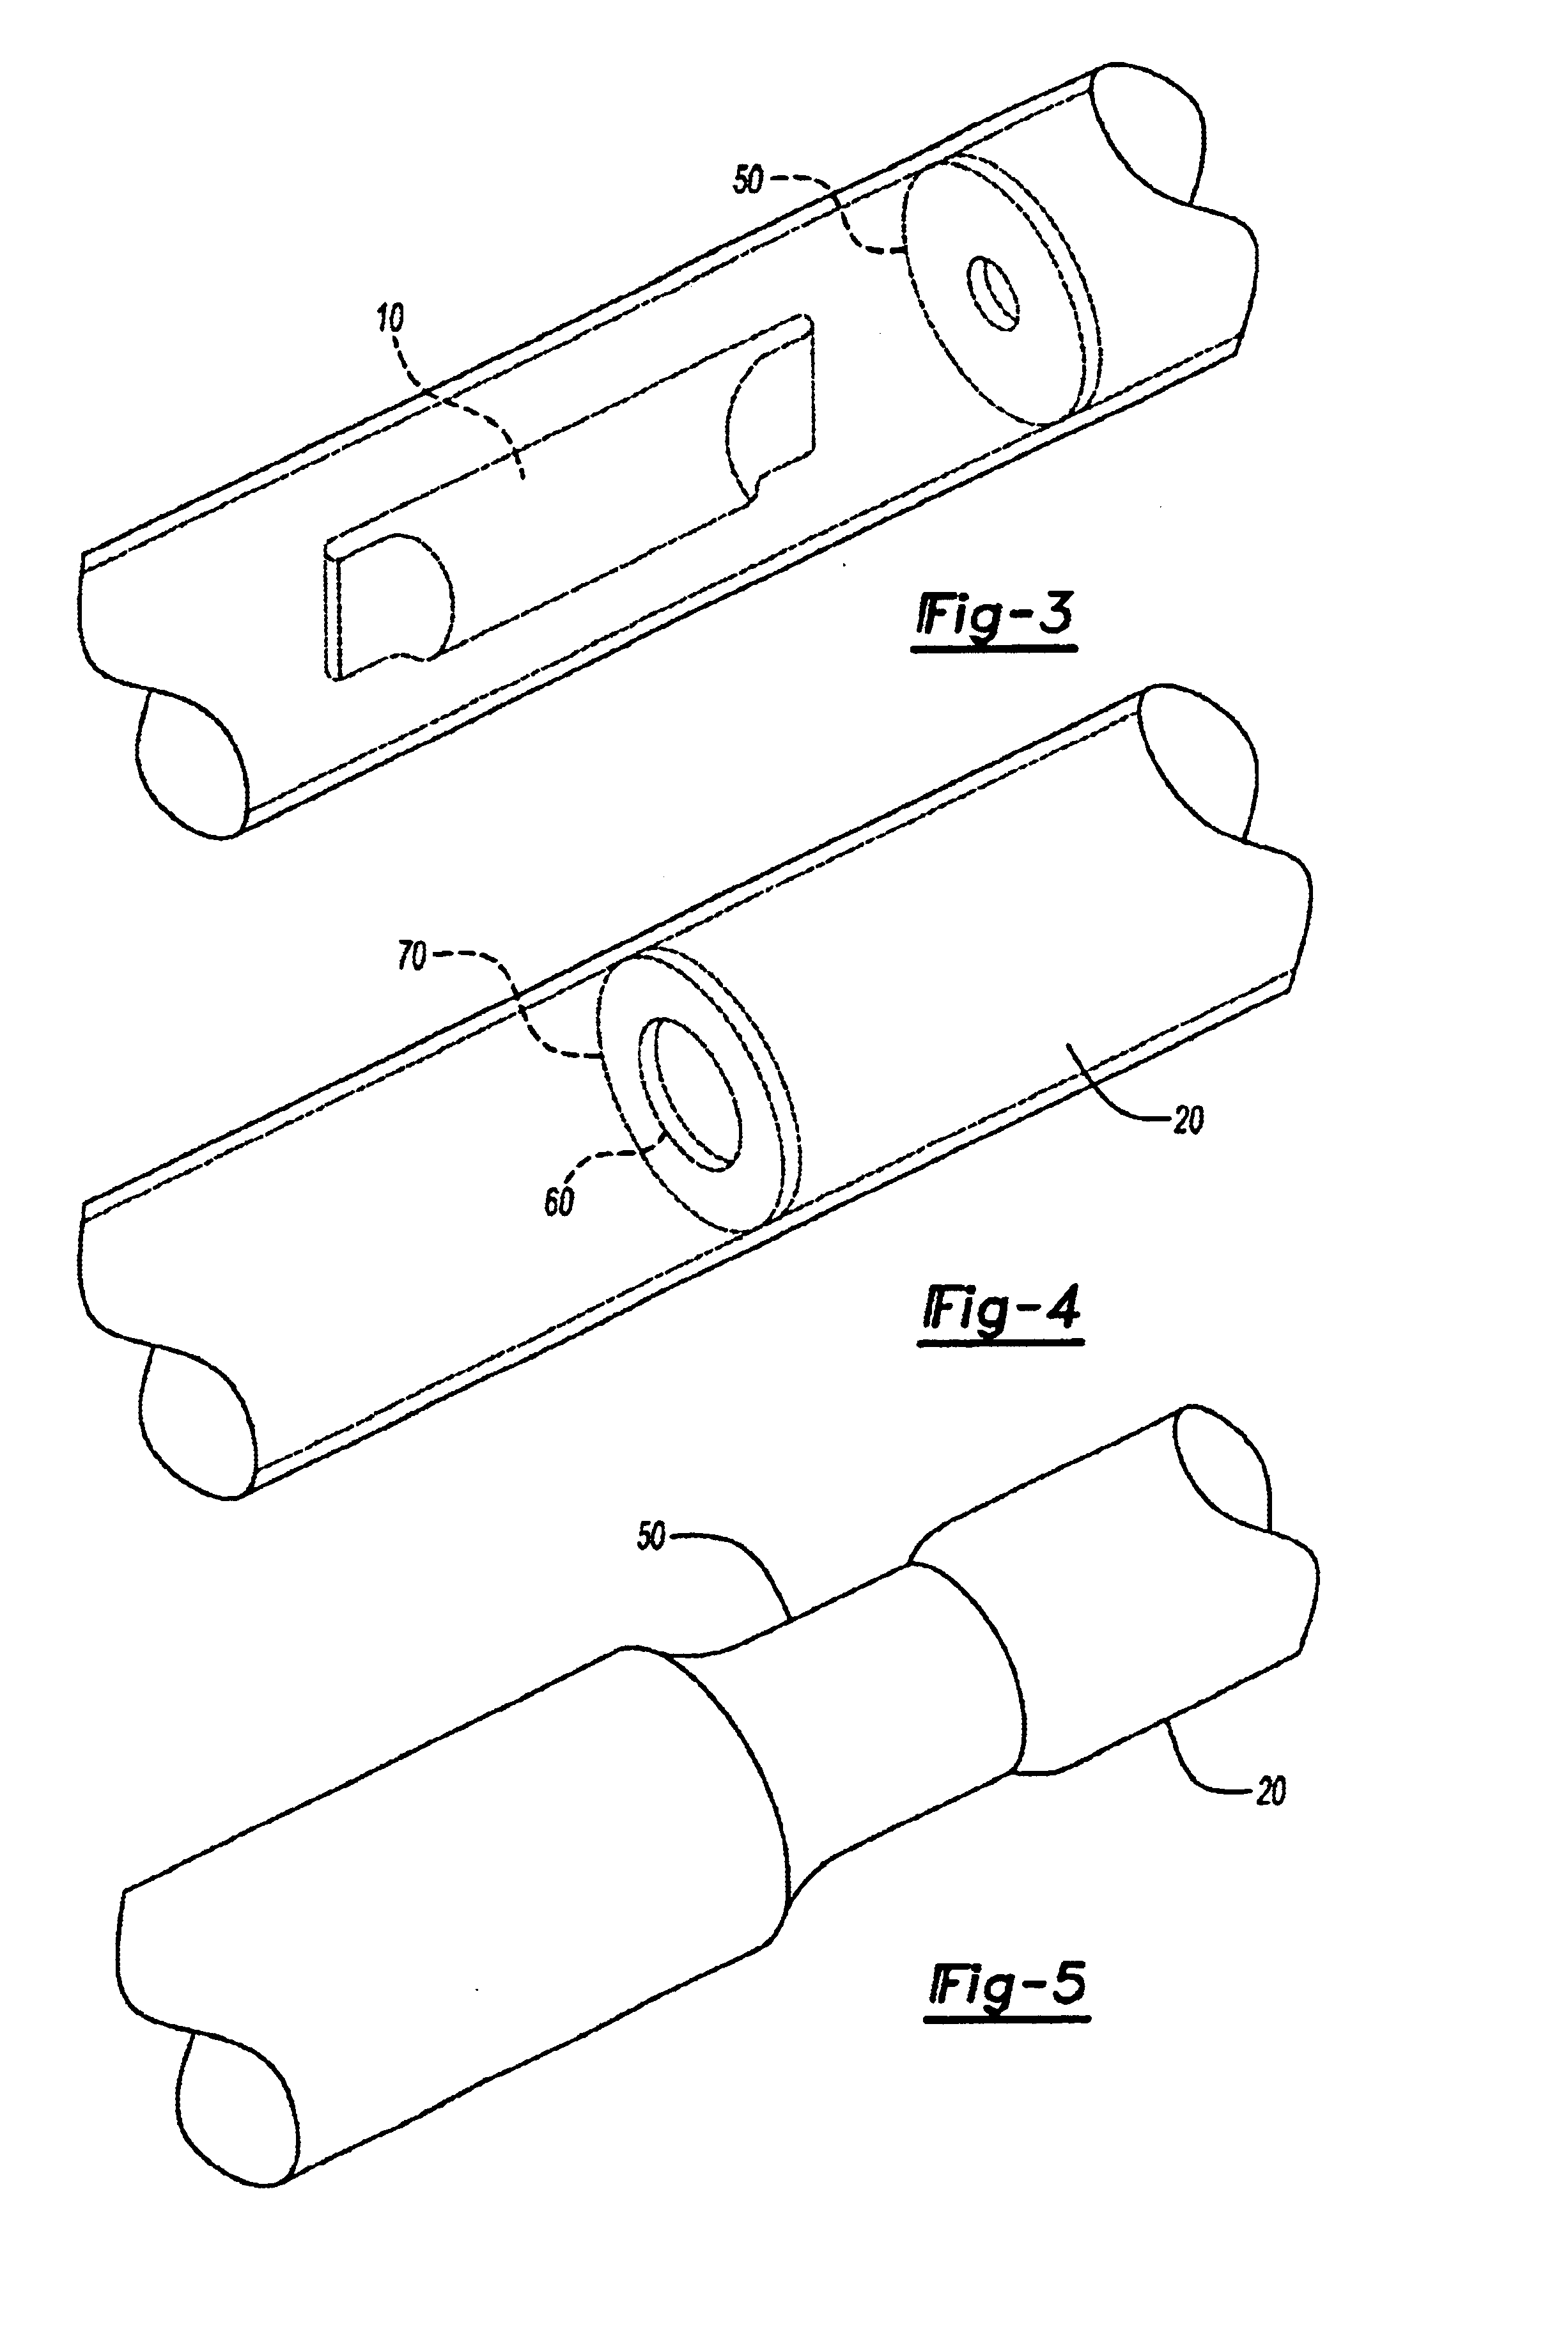 Fuel pressure damping system and method